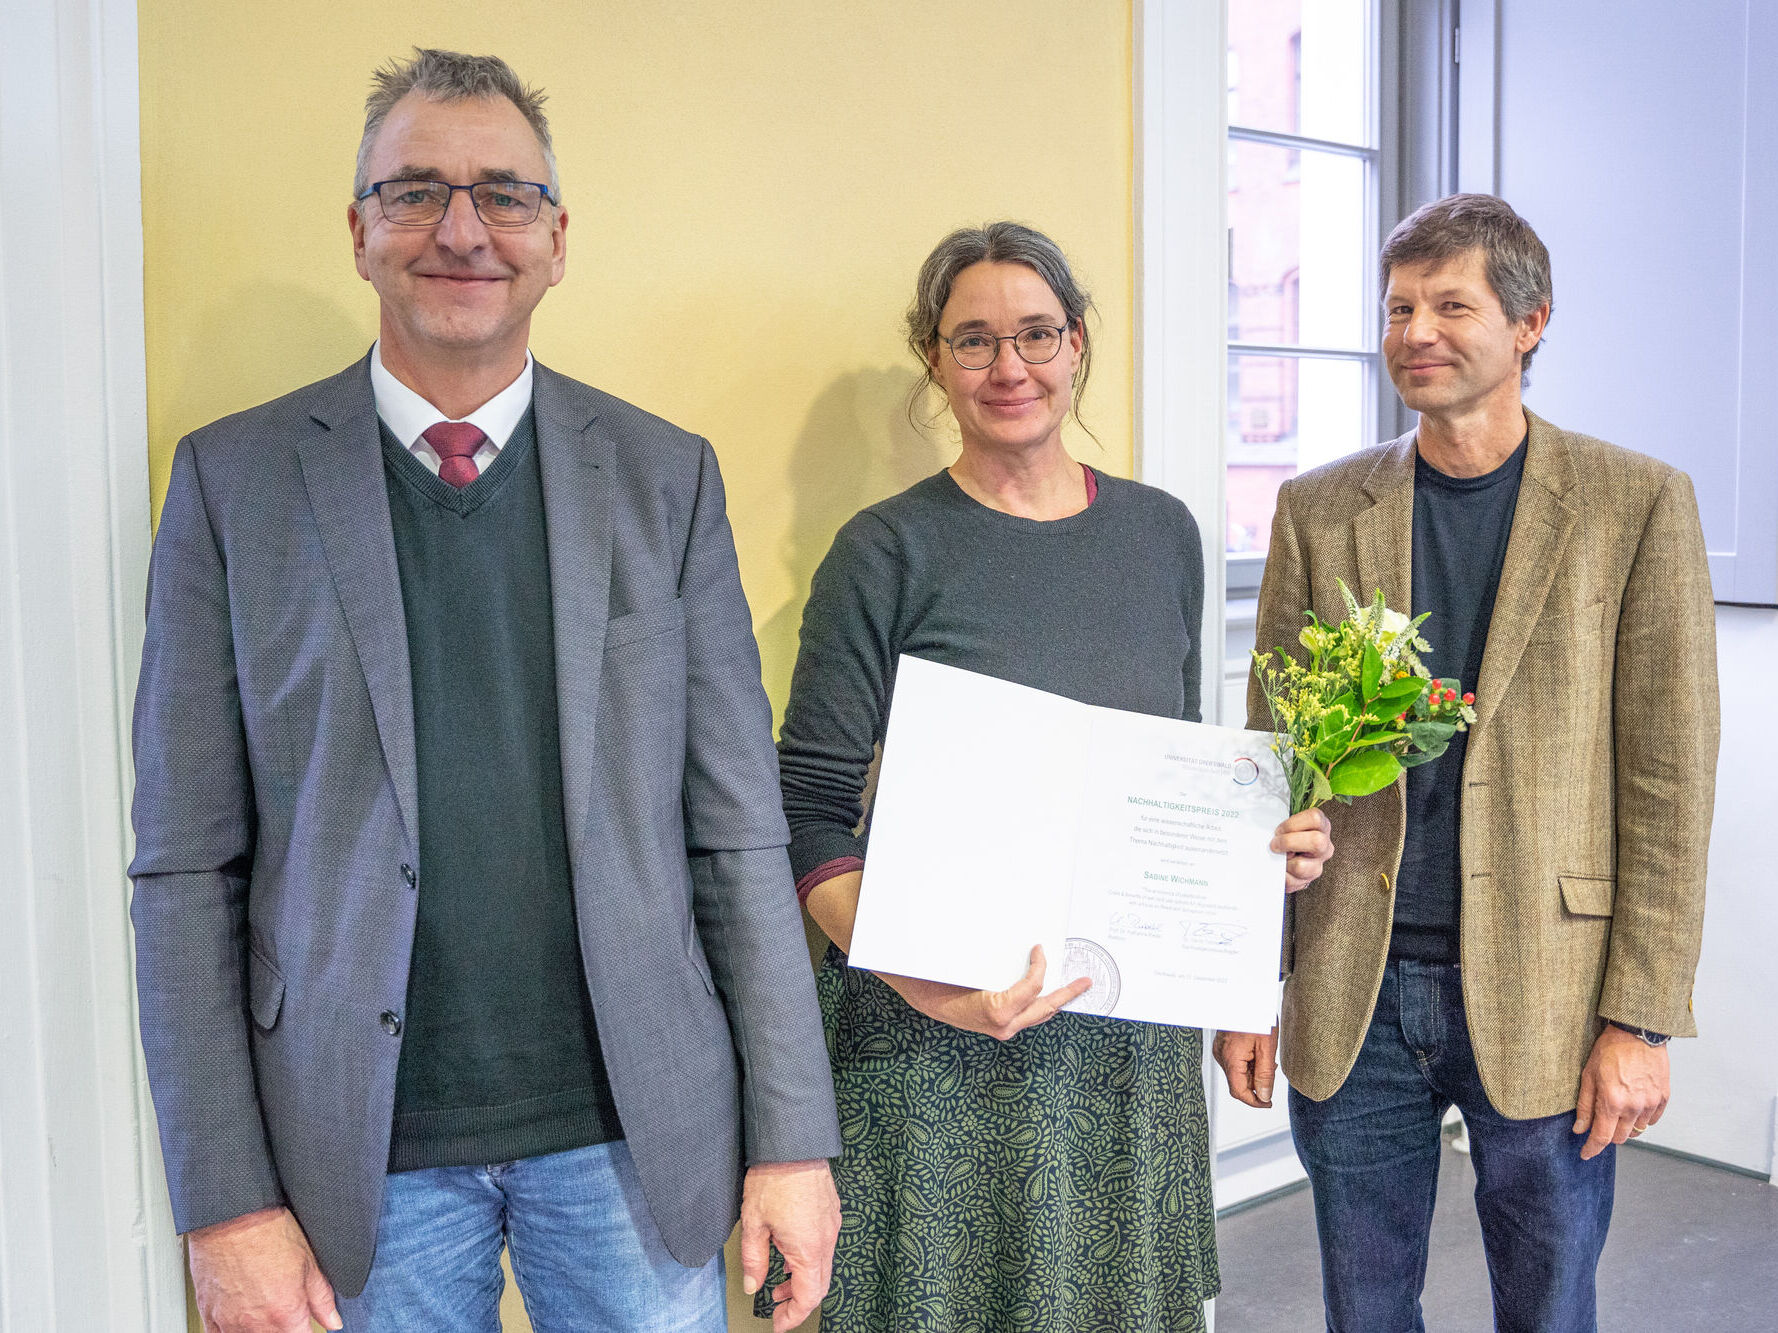 Dr. Sabine Wichmann receiving the Sustainability Prize 2022, © Patrick Geßner, 2022